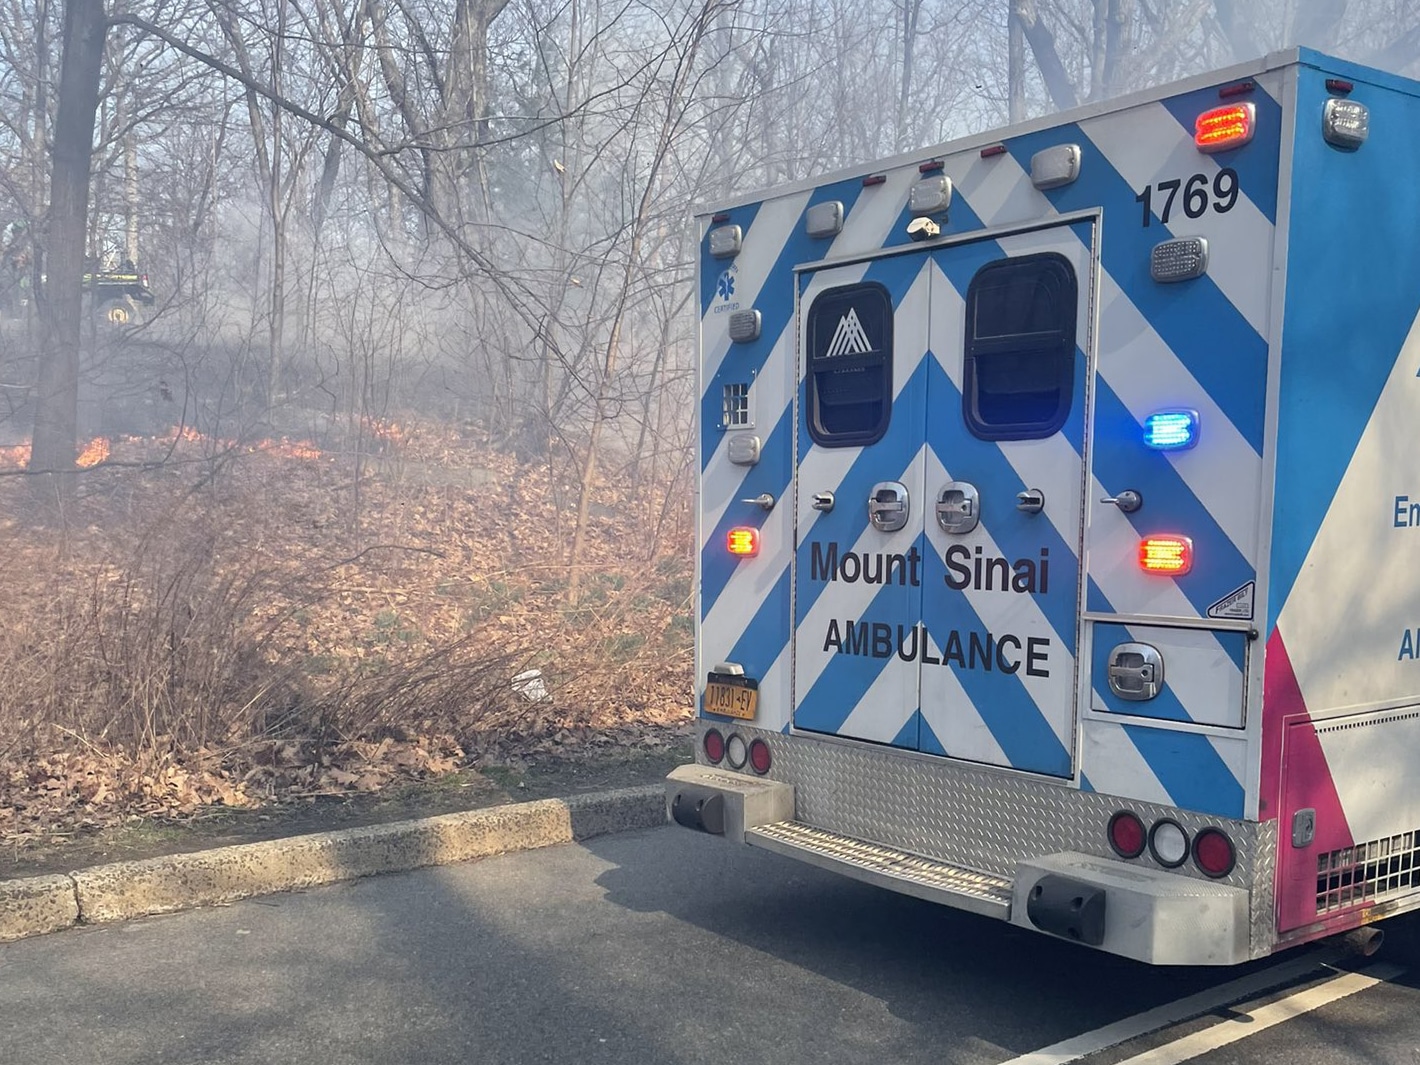 Central Park fires believed to be intentionally set